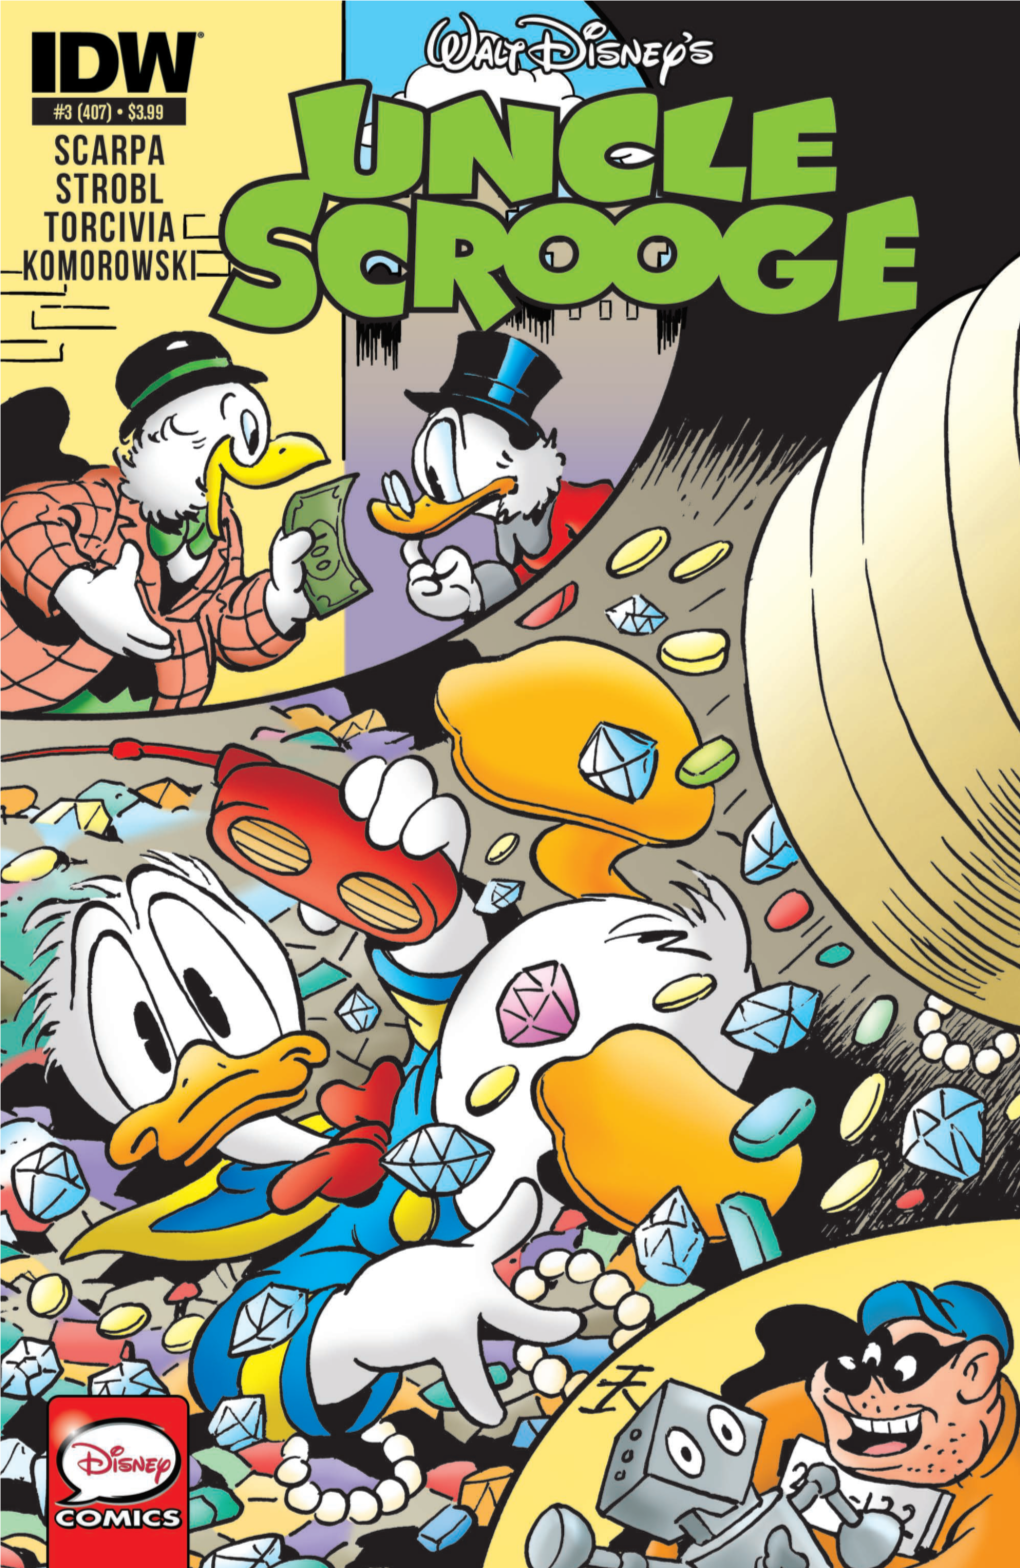 UNCLE SCROOGE #3 Preview